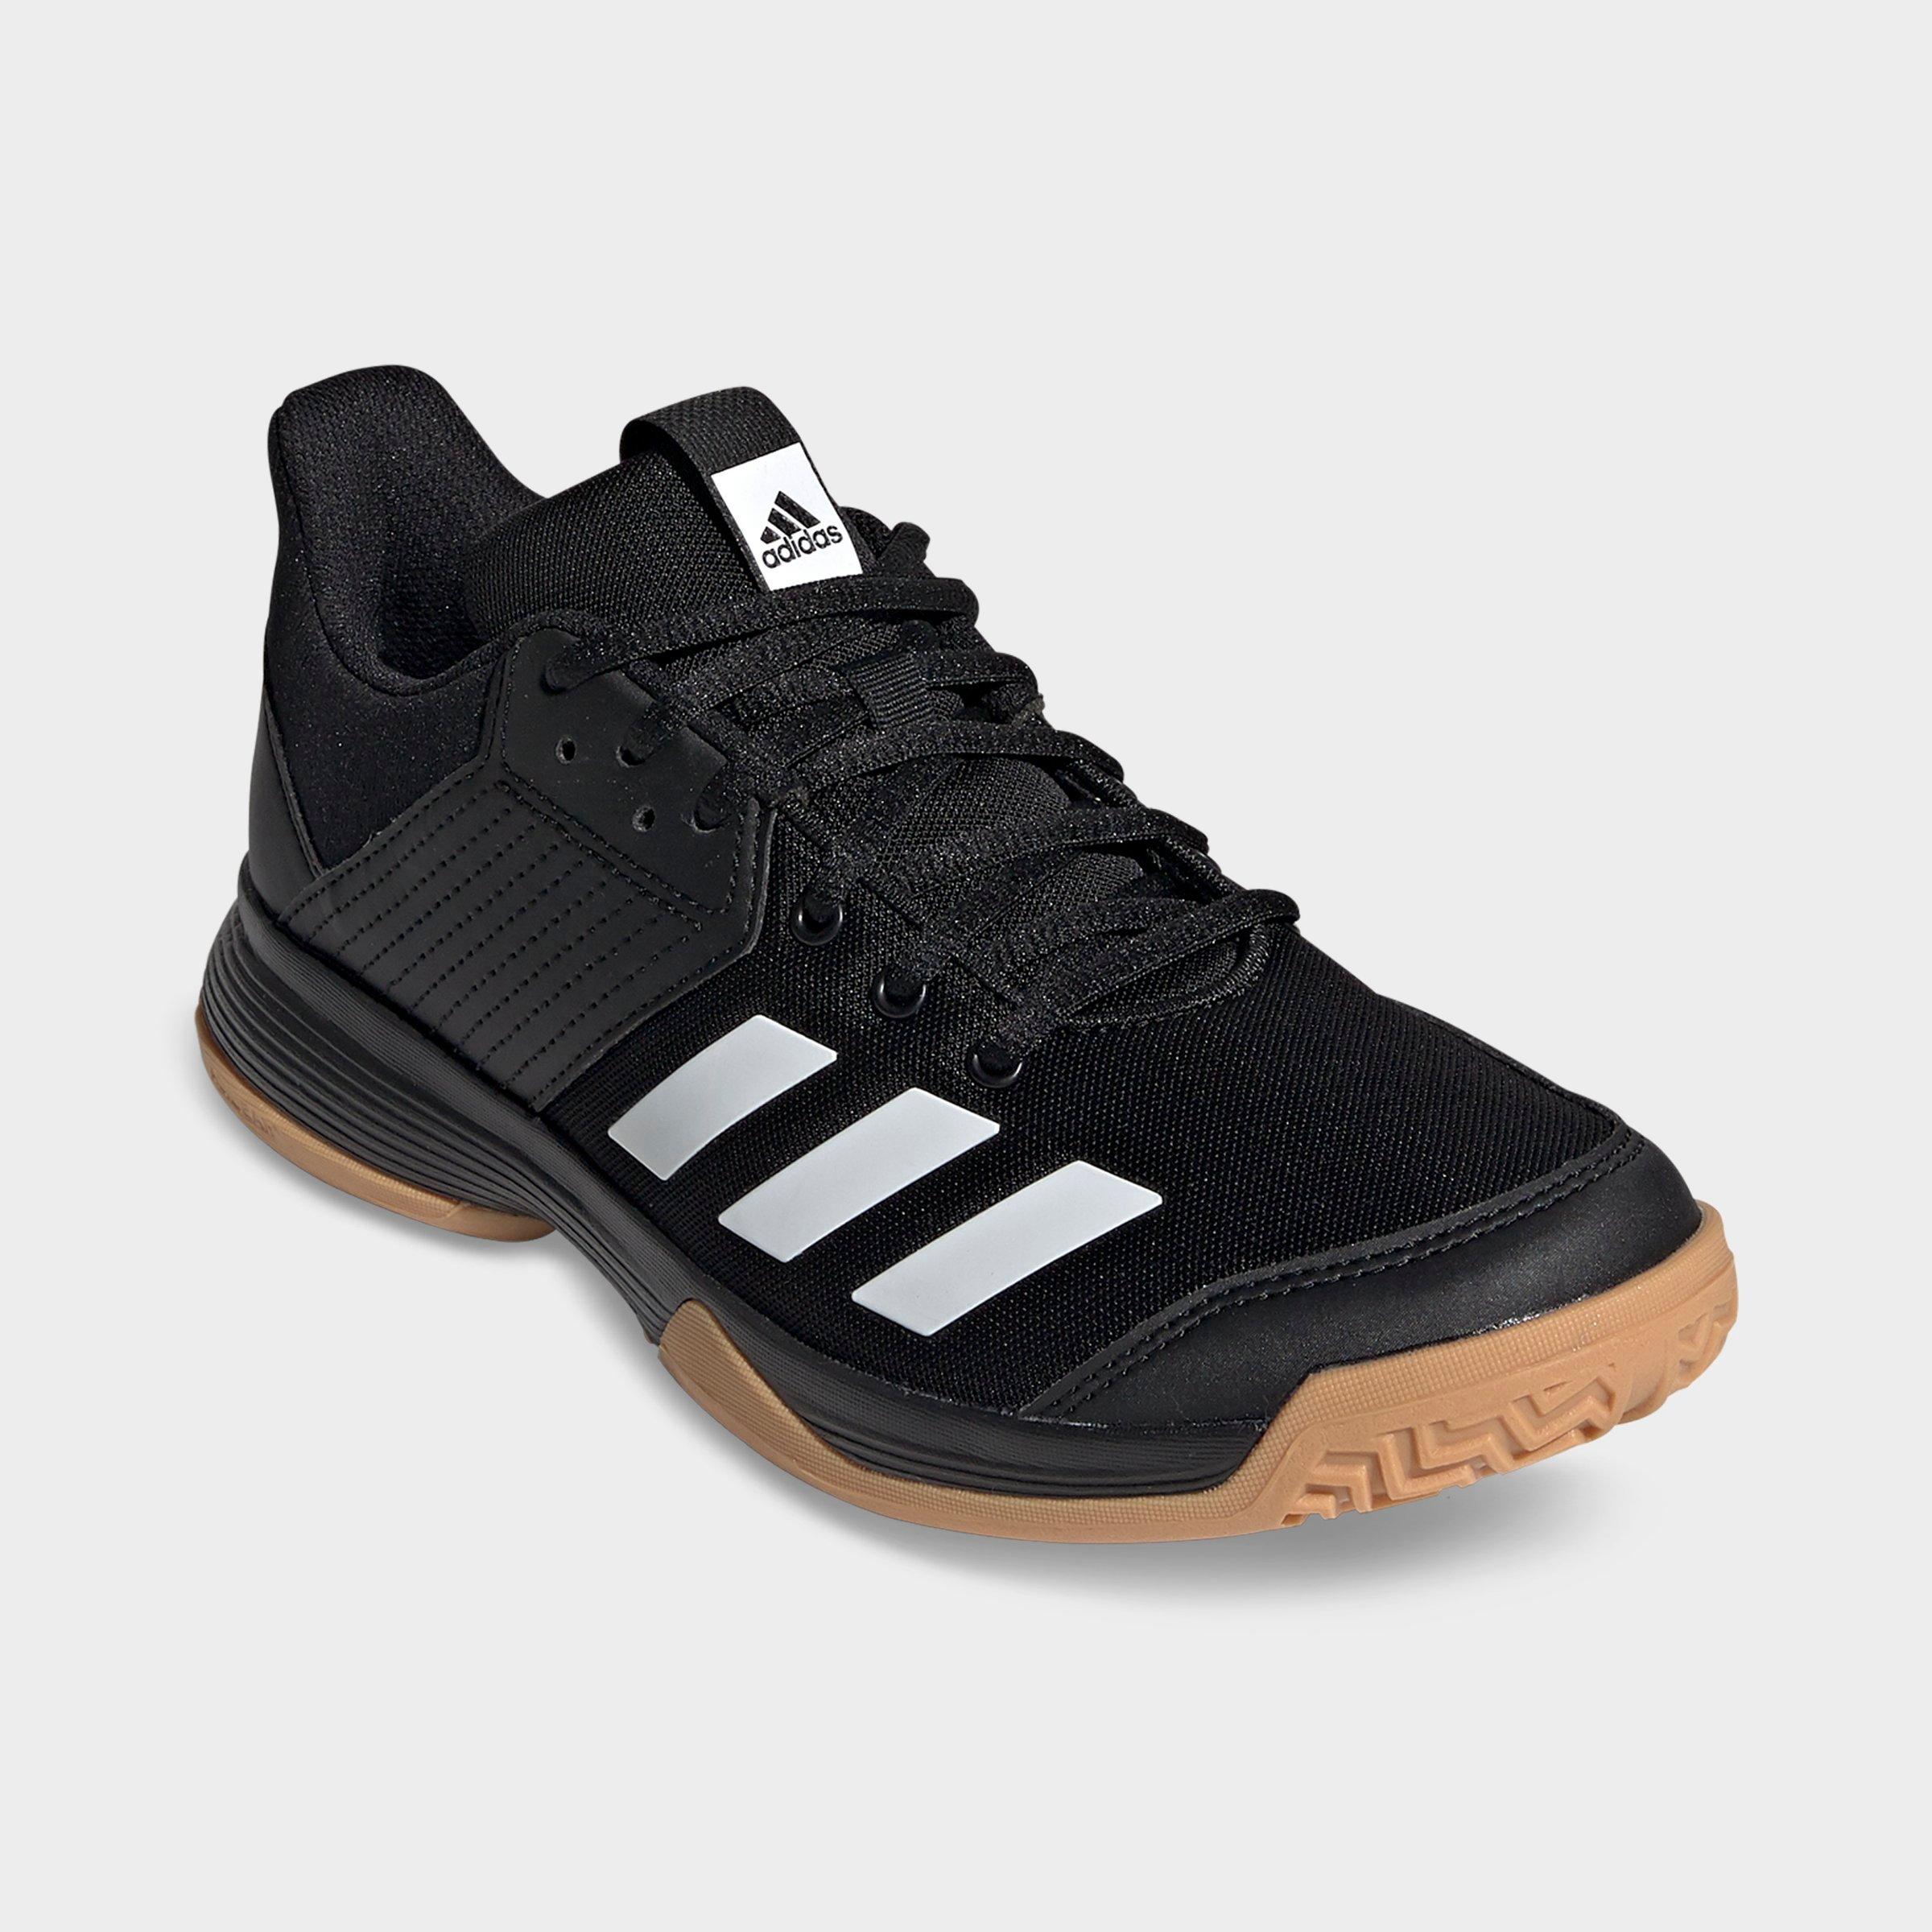 ligra 6 volleyball shoes